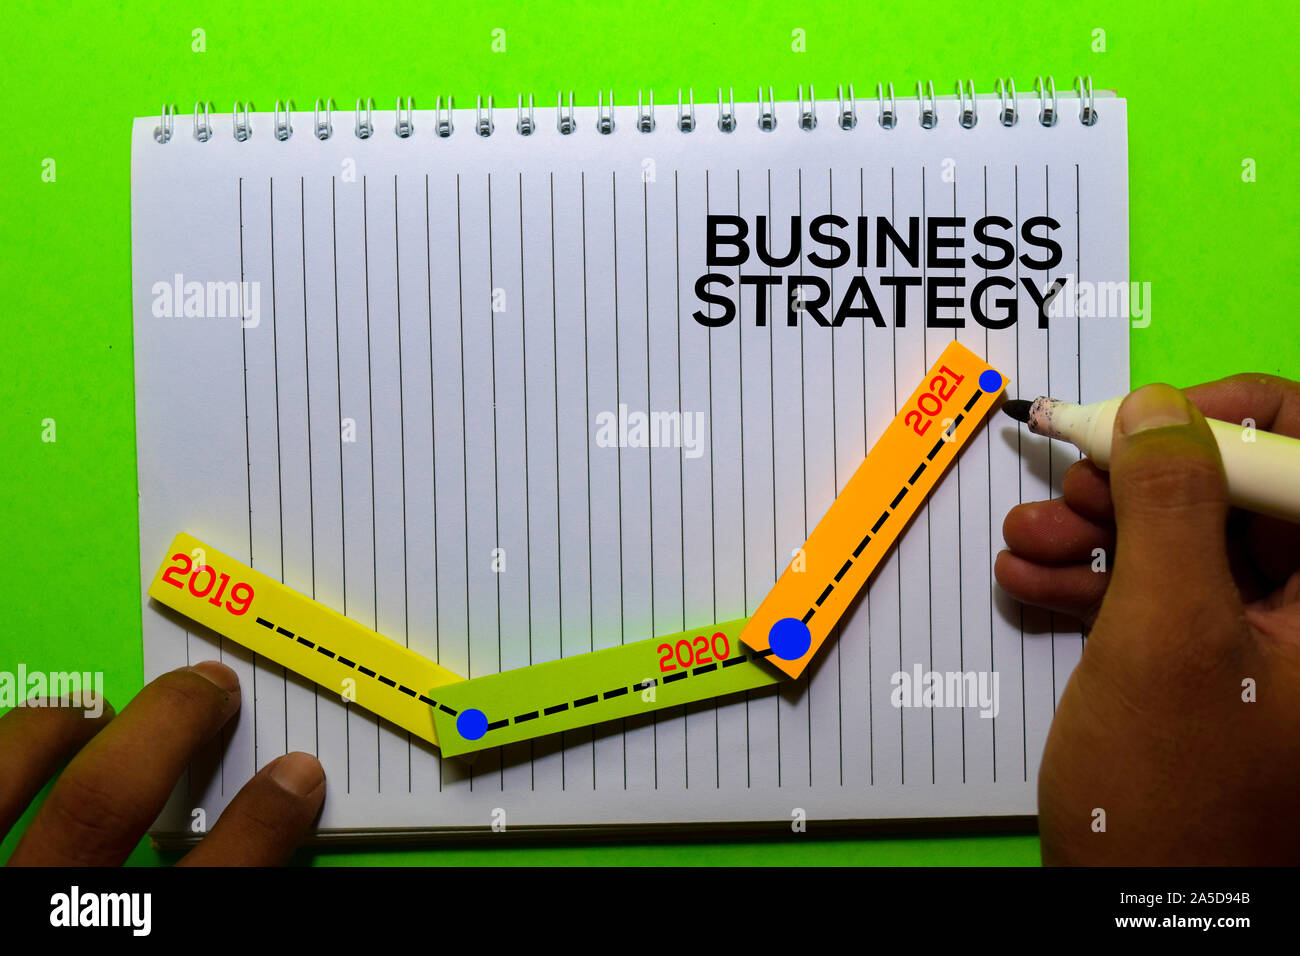 Timeline Business Strategy 2019 - 2020 - 2021 Years on Book. Isolated on office desk background Stock Photo